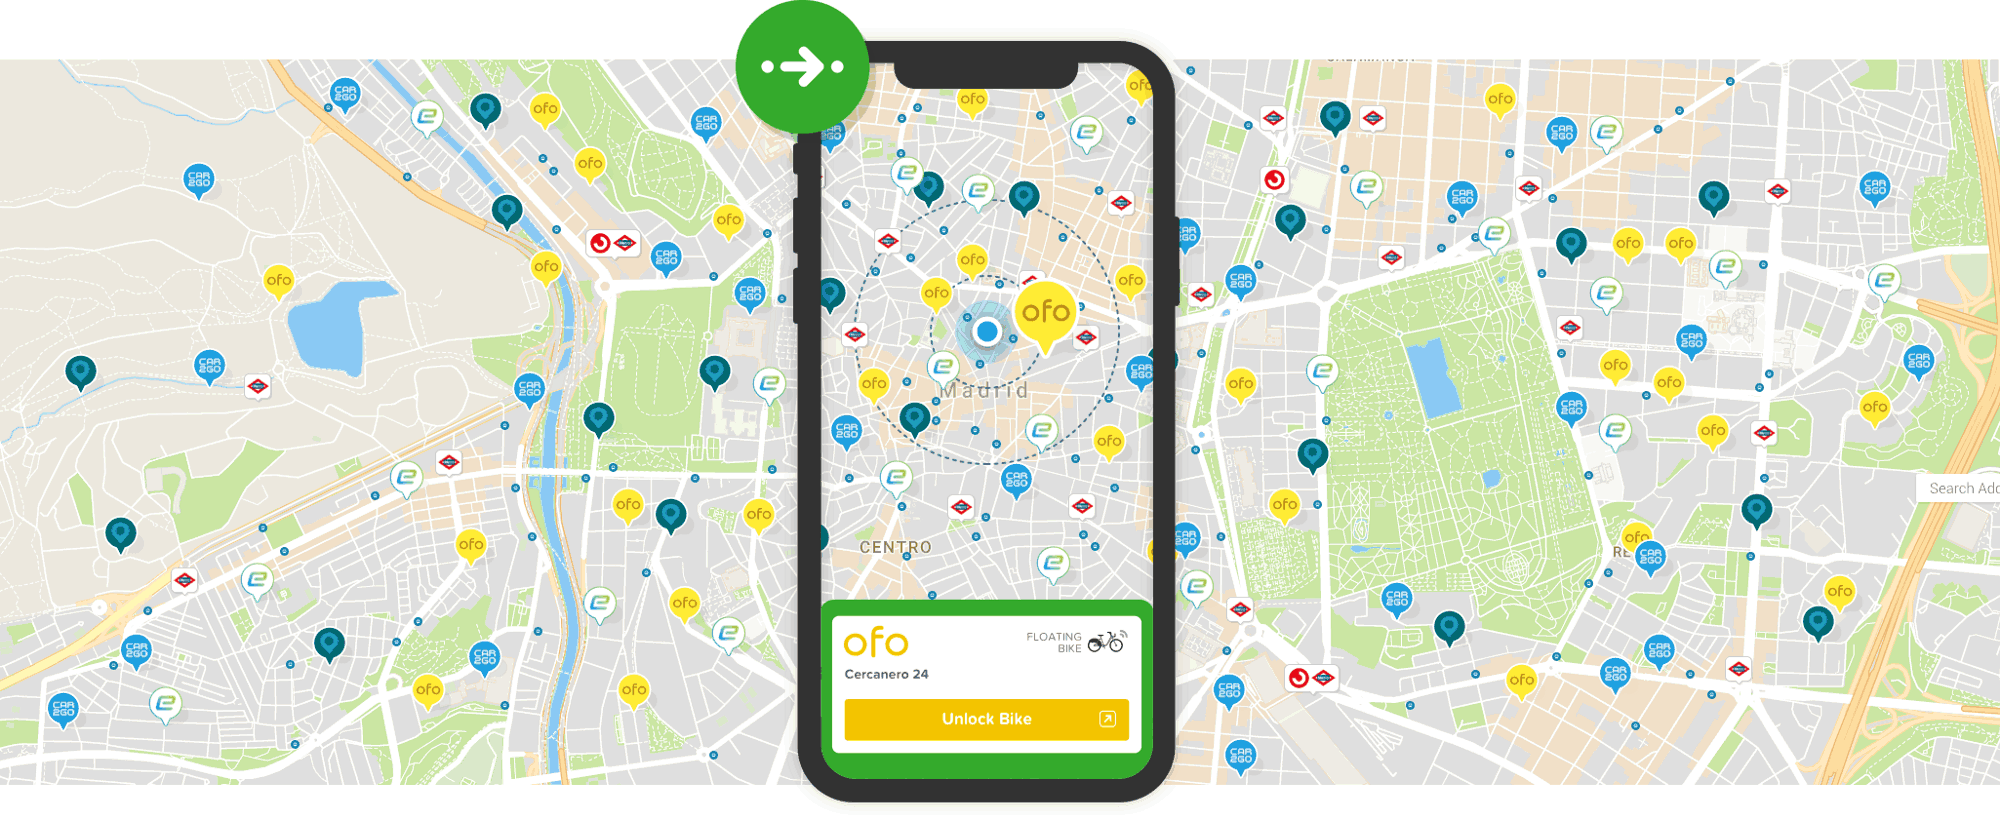 Citymapper will now show floating cycles as options when journey planning.